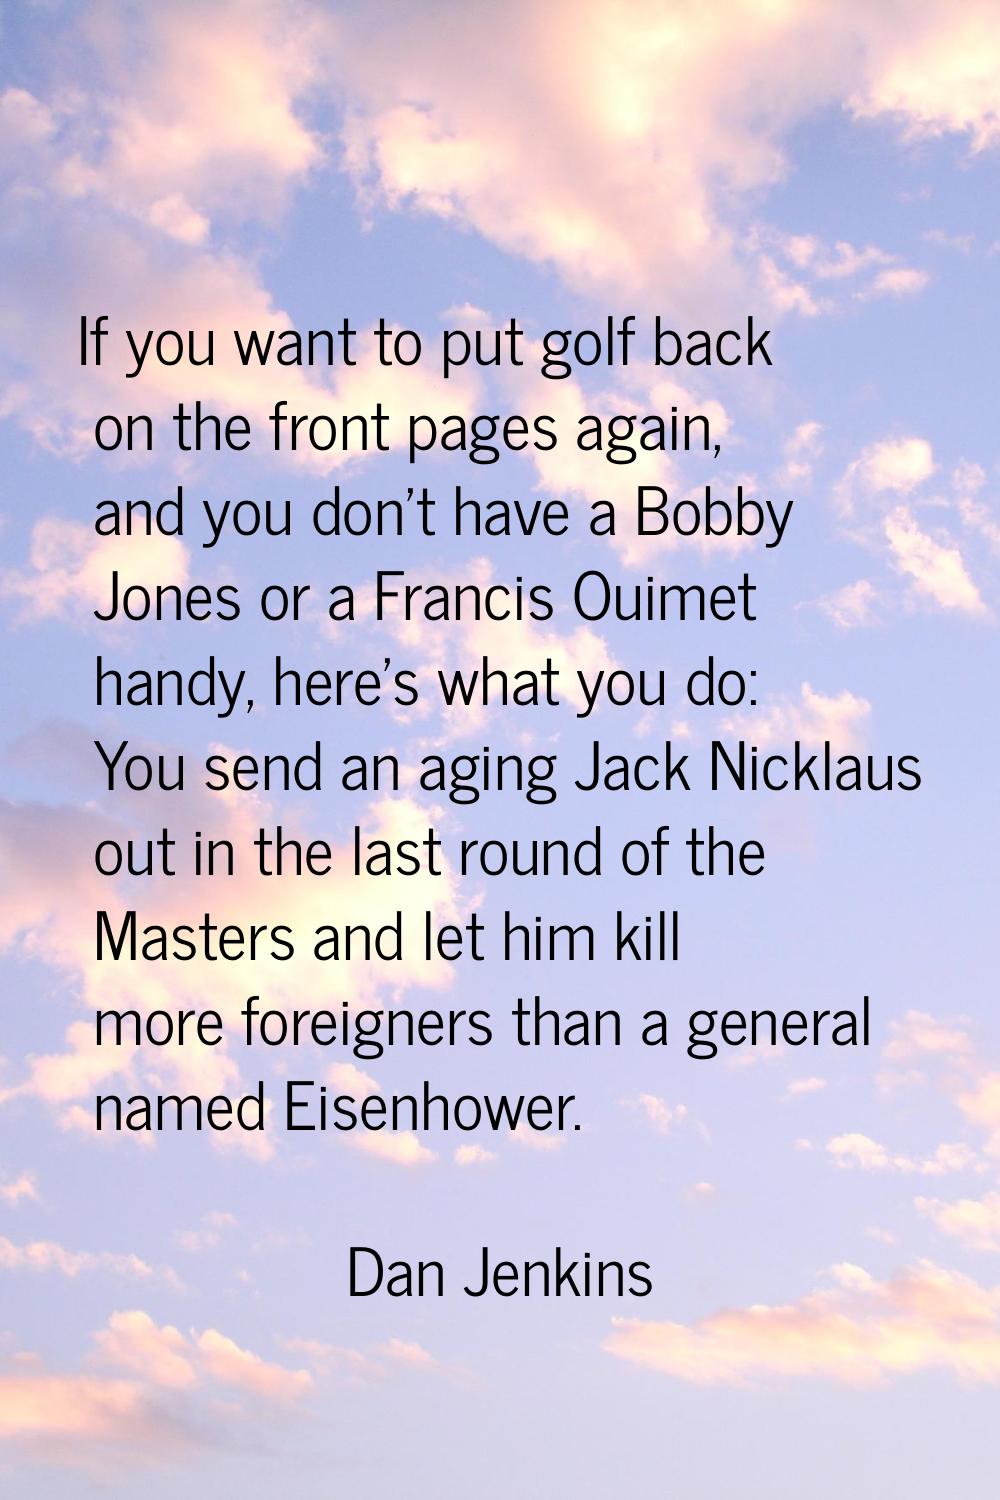 If you want to put golf back on the front pages again, and you don't have a Bobby Jones or a Franci